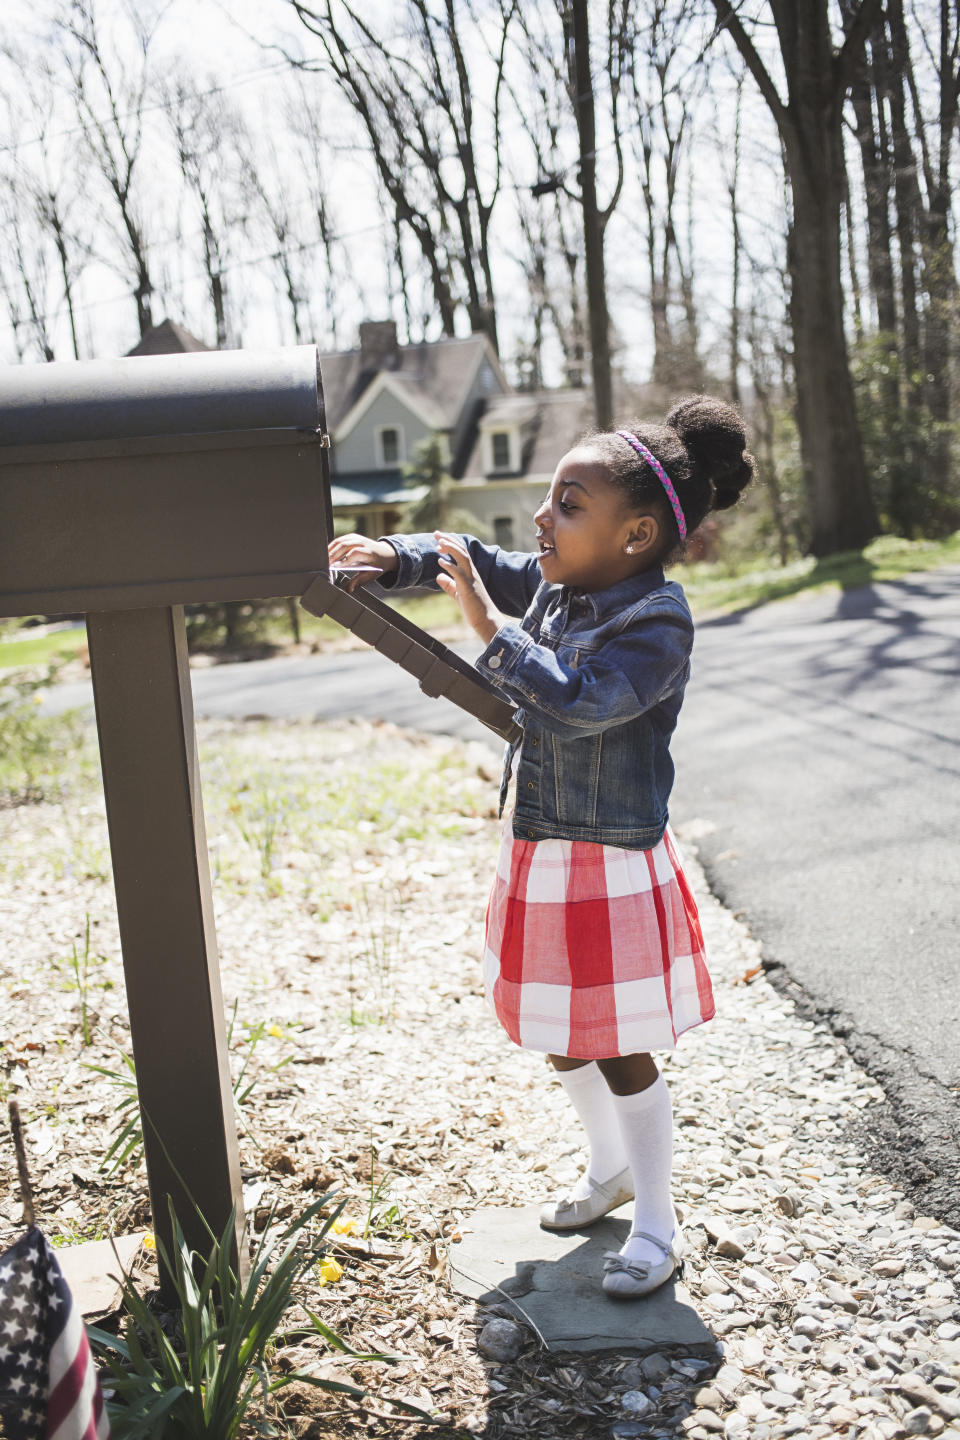 A young girl looks inside her family's mail box